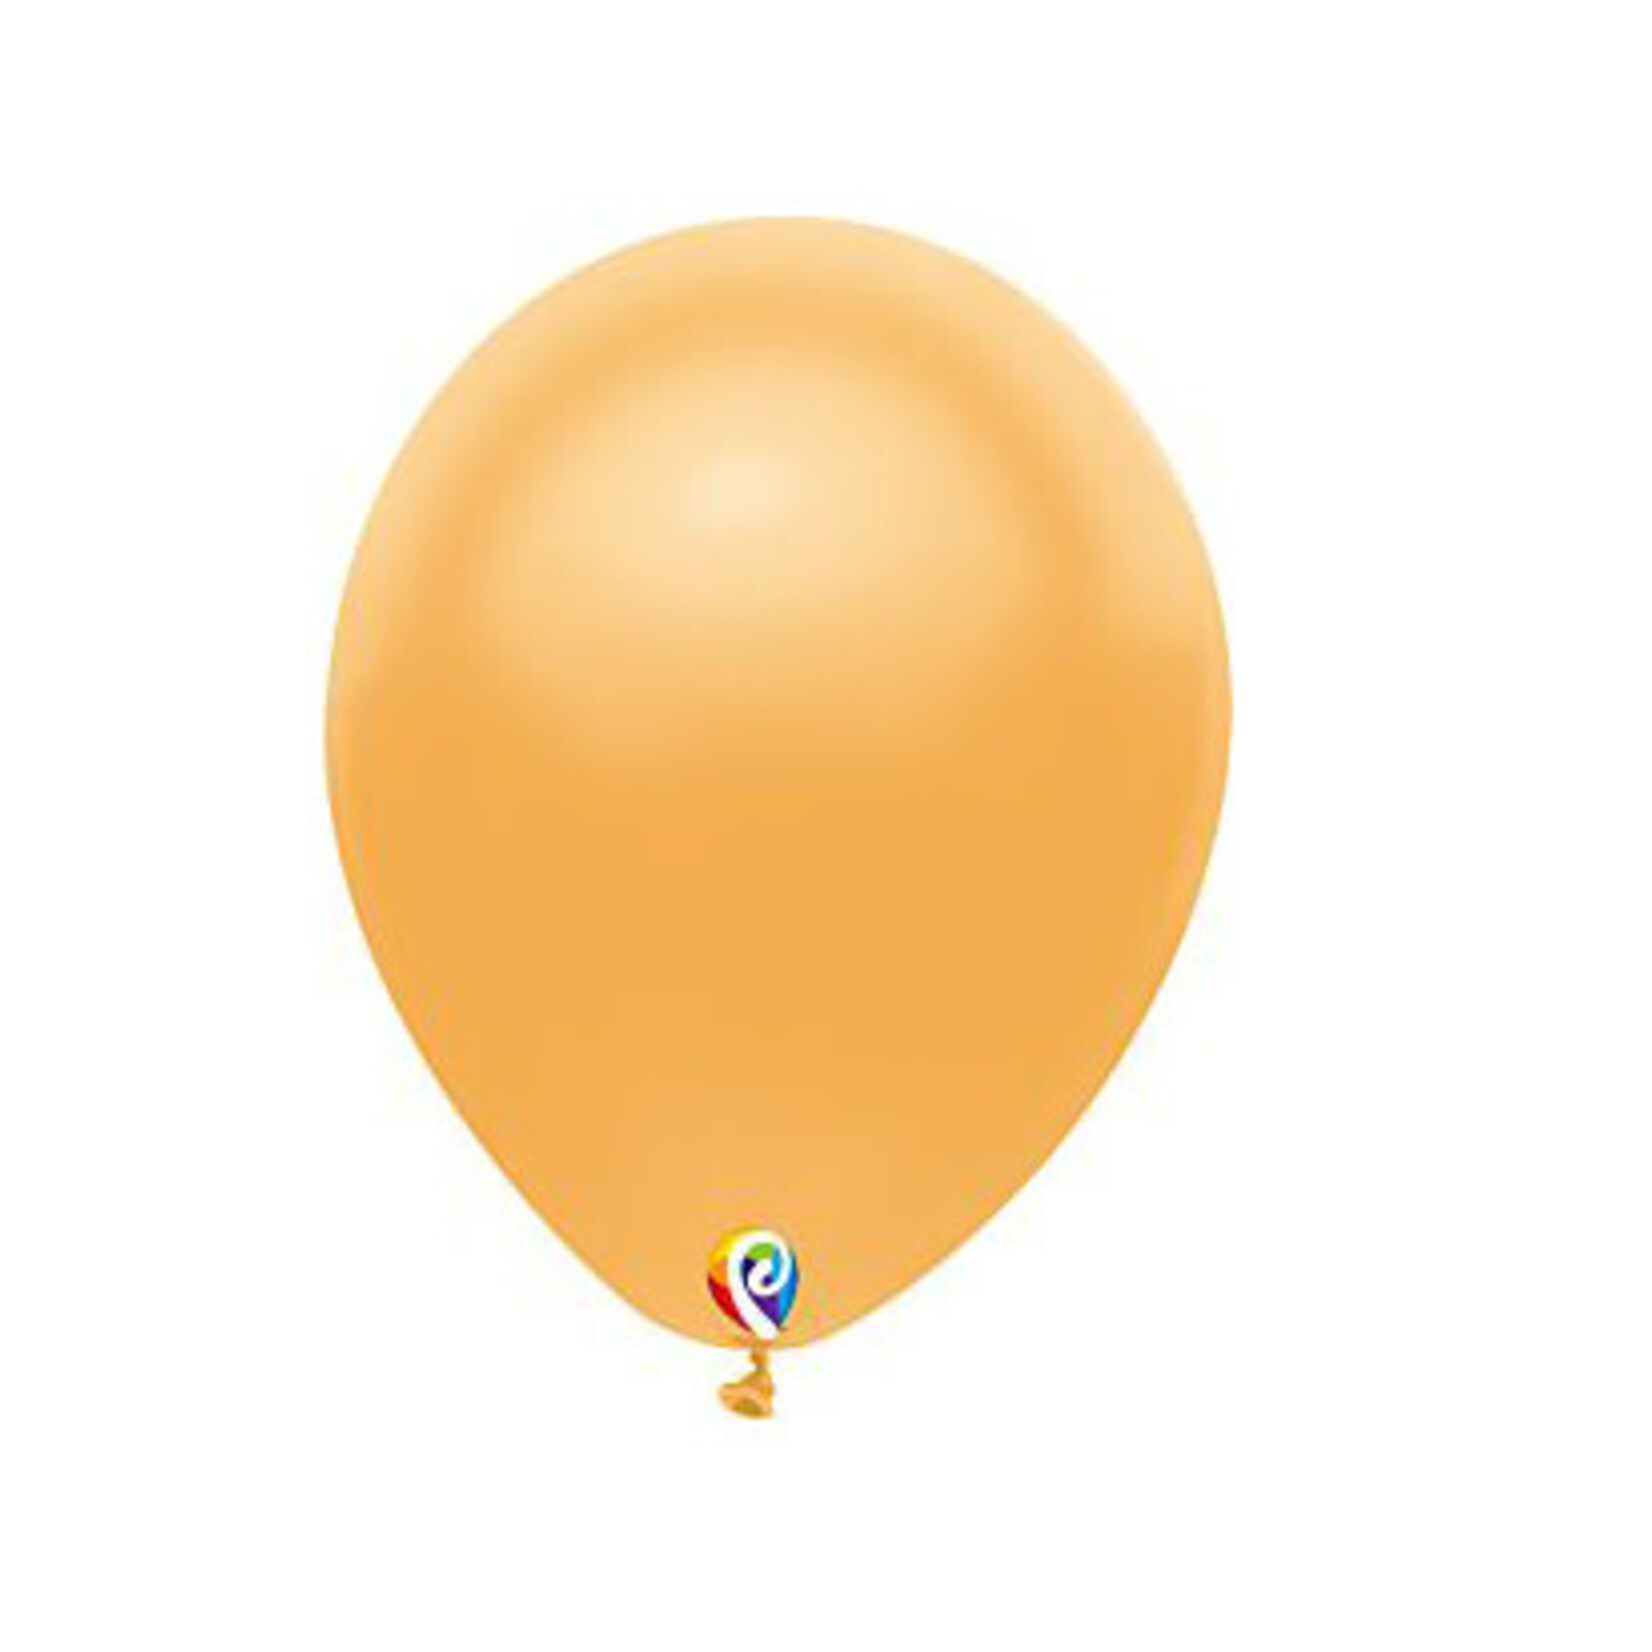 Funsational 12" Gold Latex Balloons - 12ct.